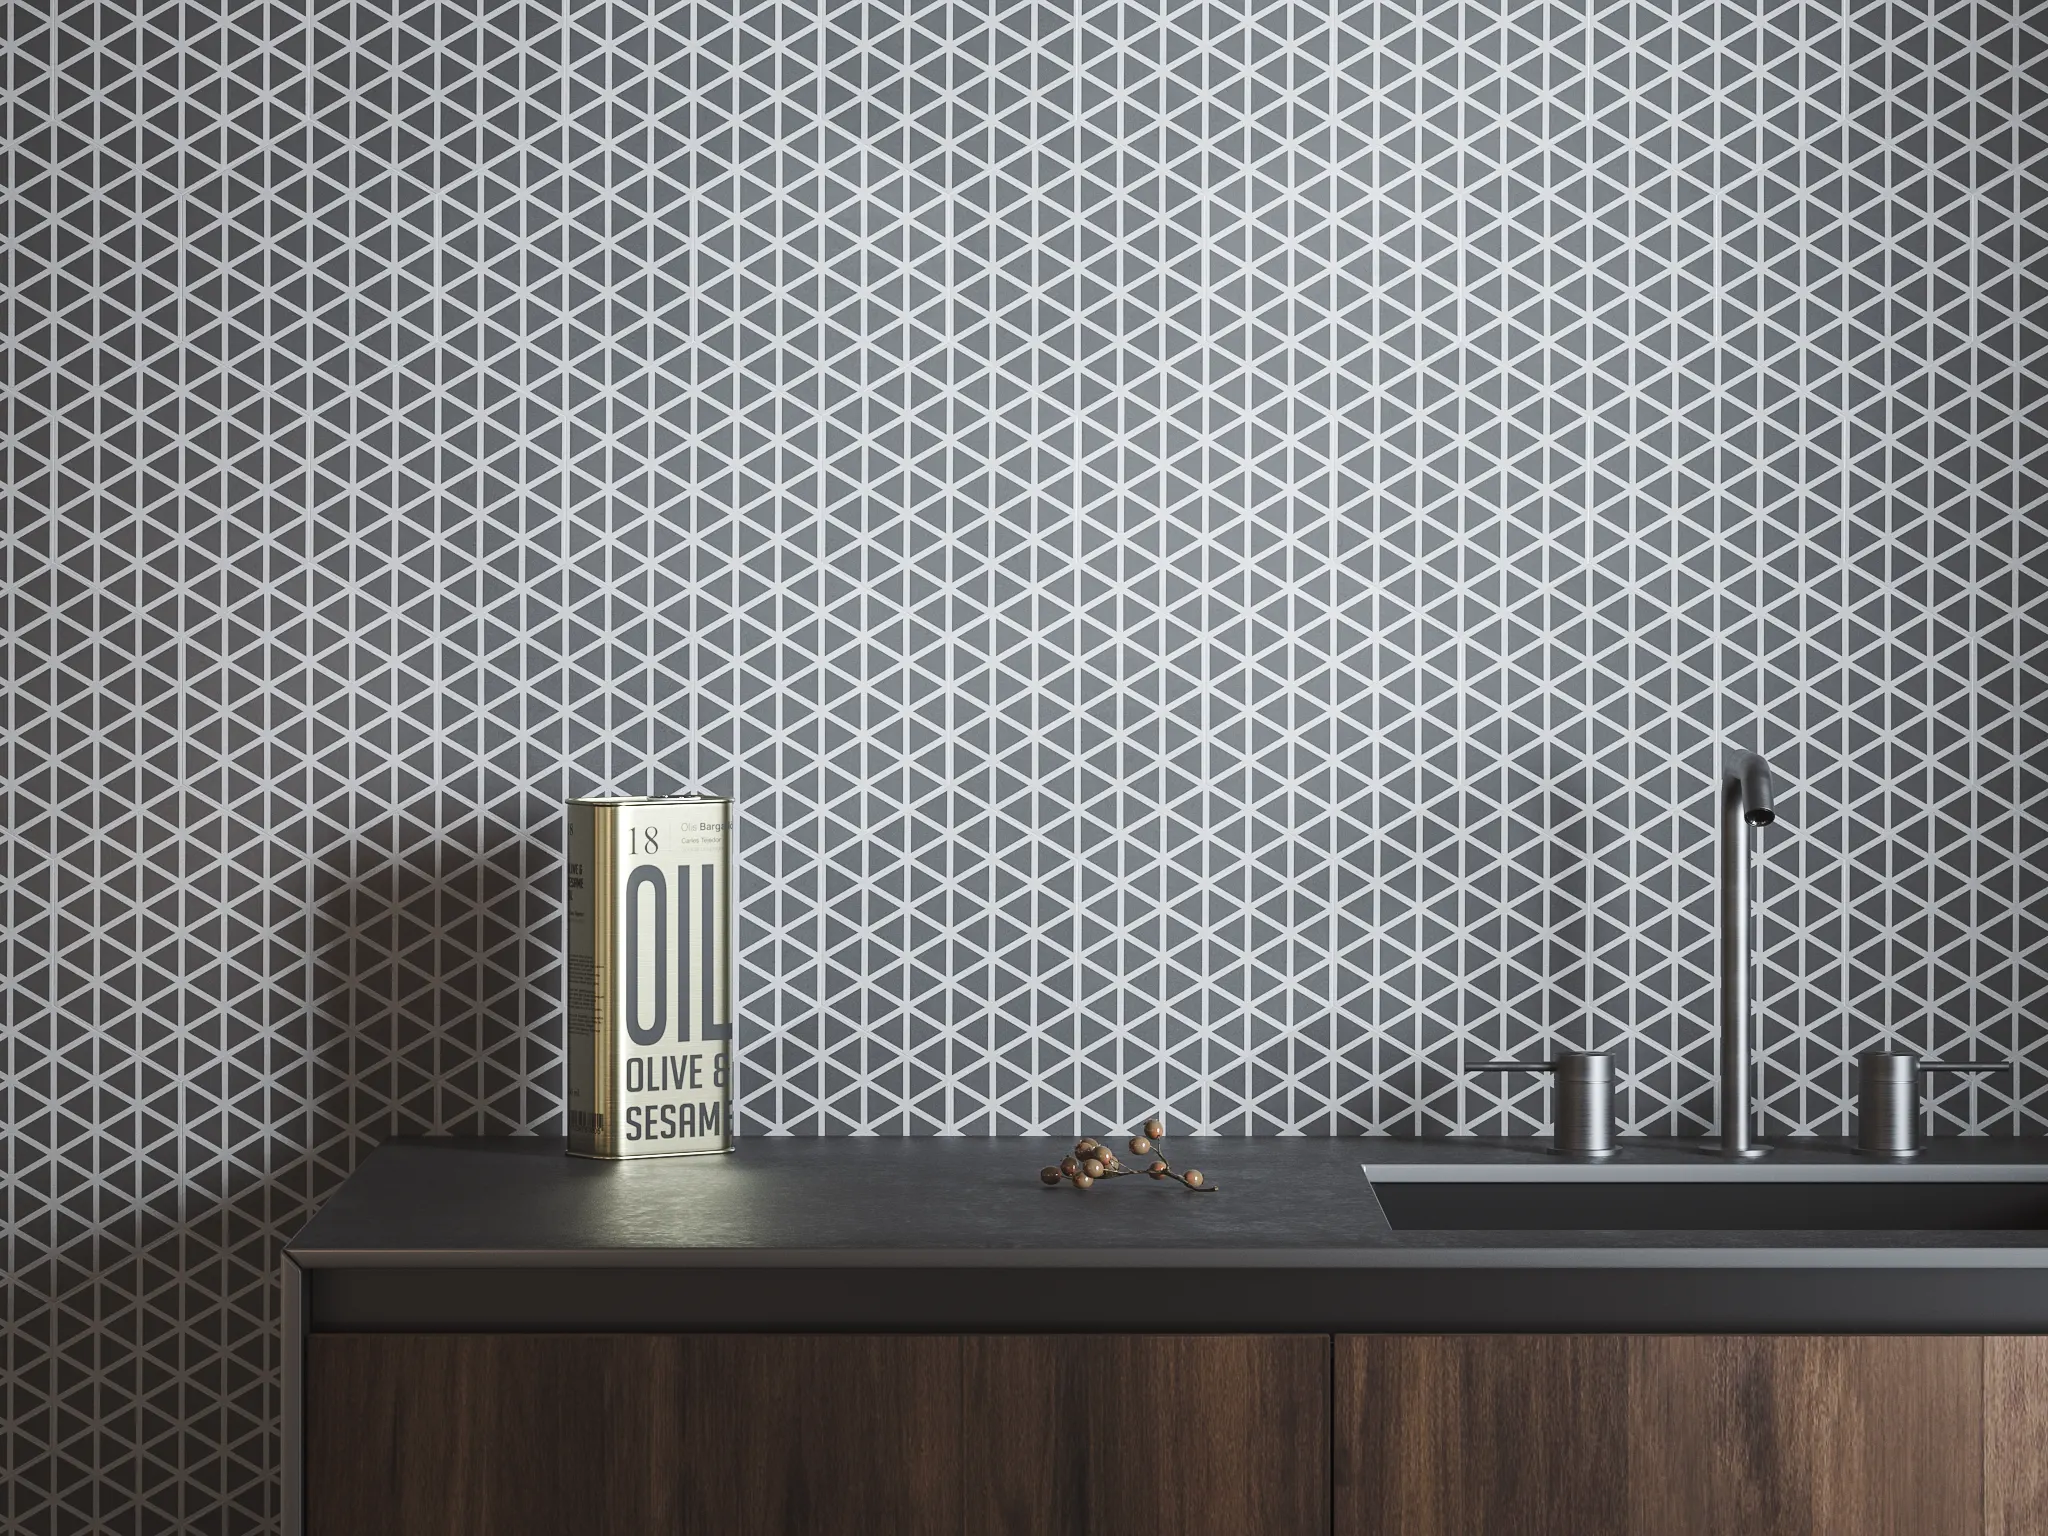 Hexagon tiles decorated with dune design inspiration